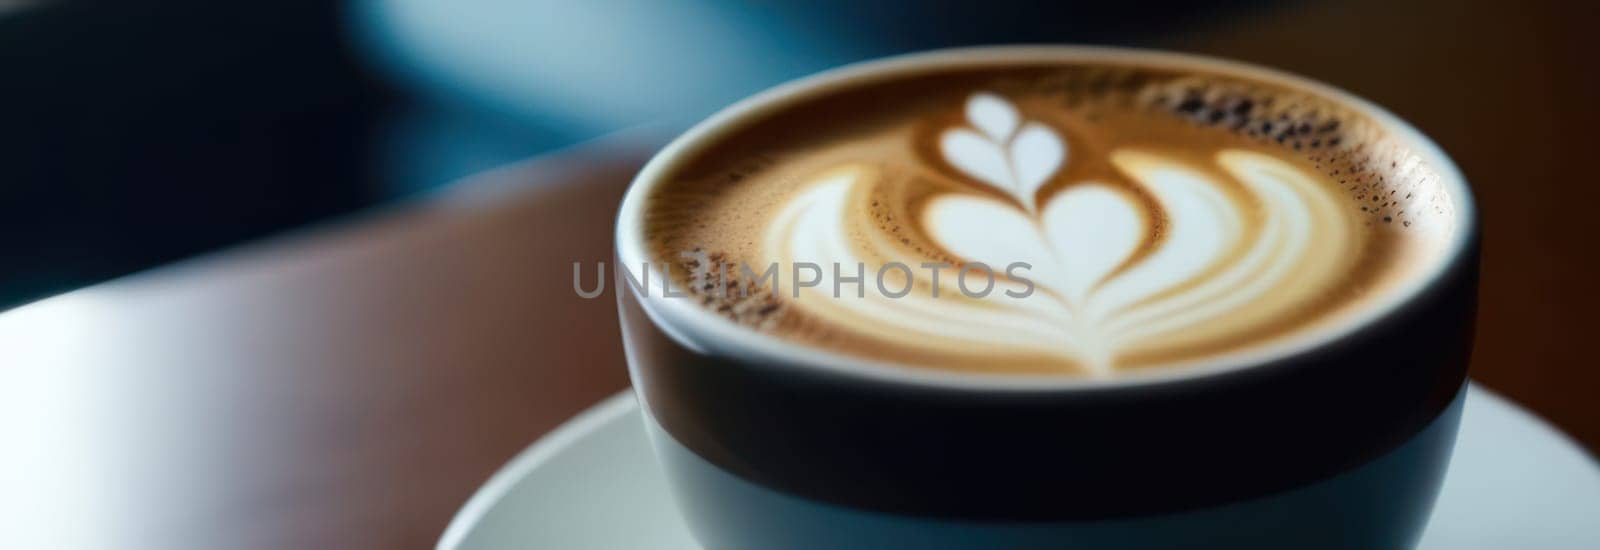 Cup of hot coffee on dark background.Long photo banner for website header design with copy space. Cafe menu concept idea background